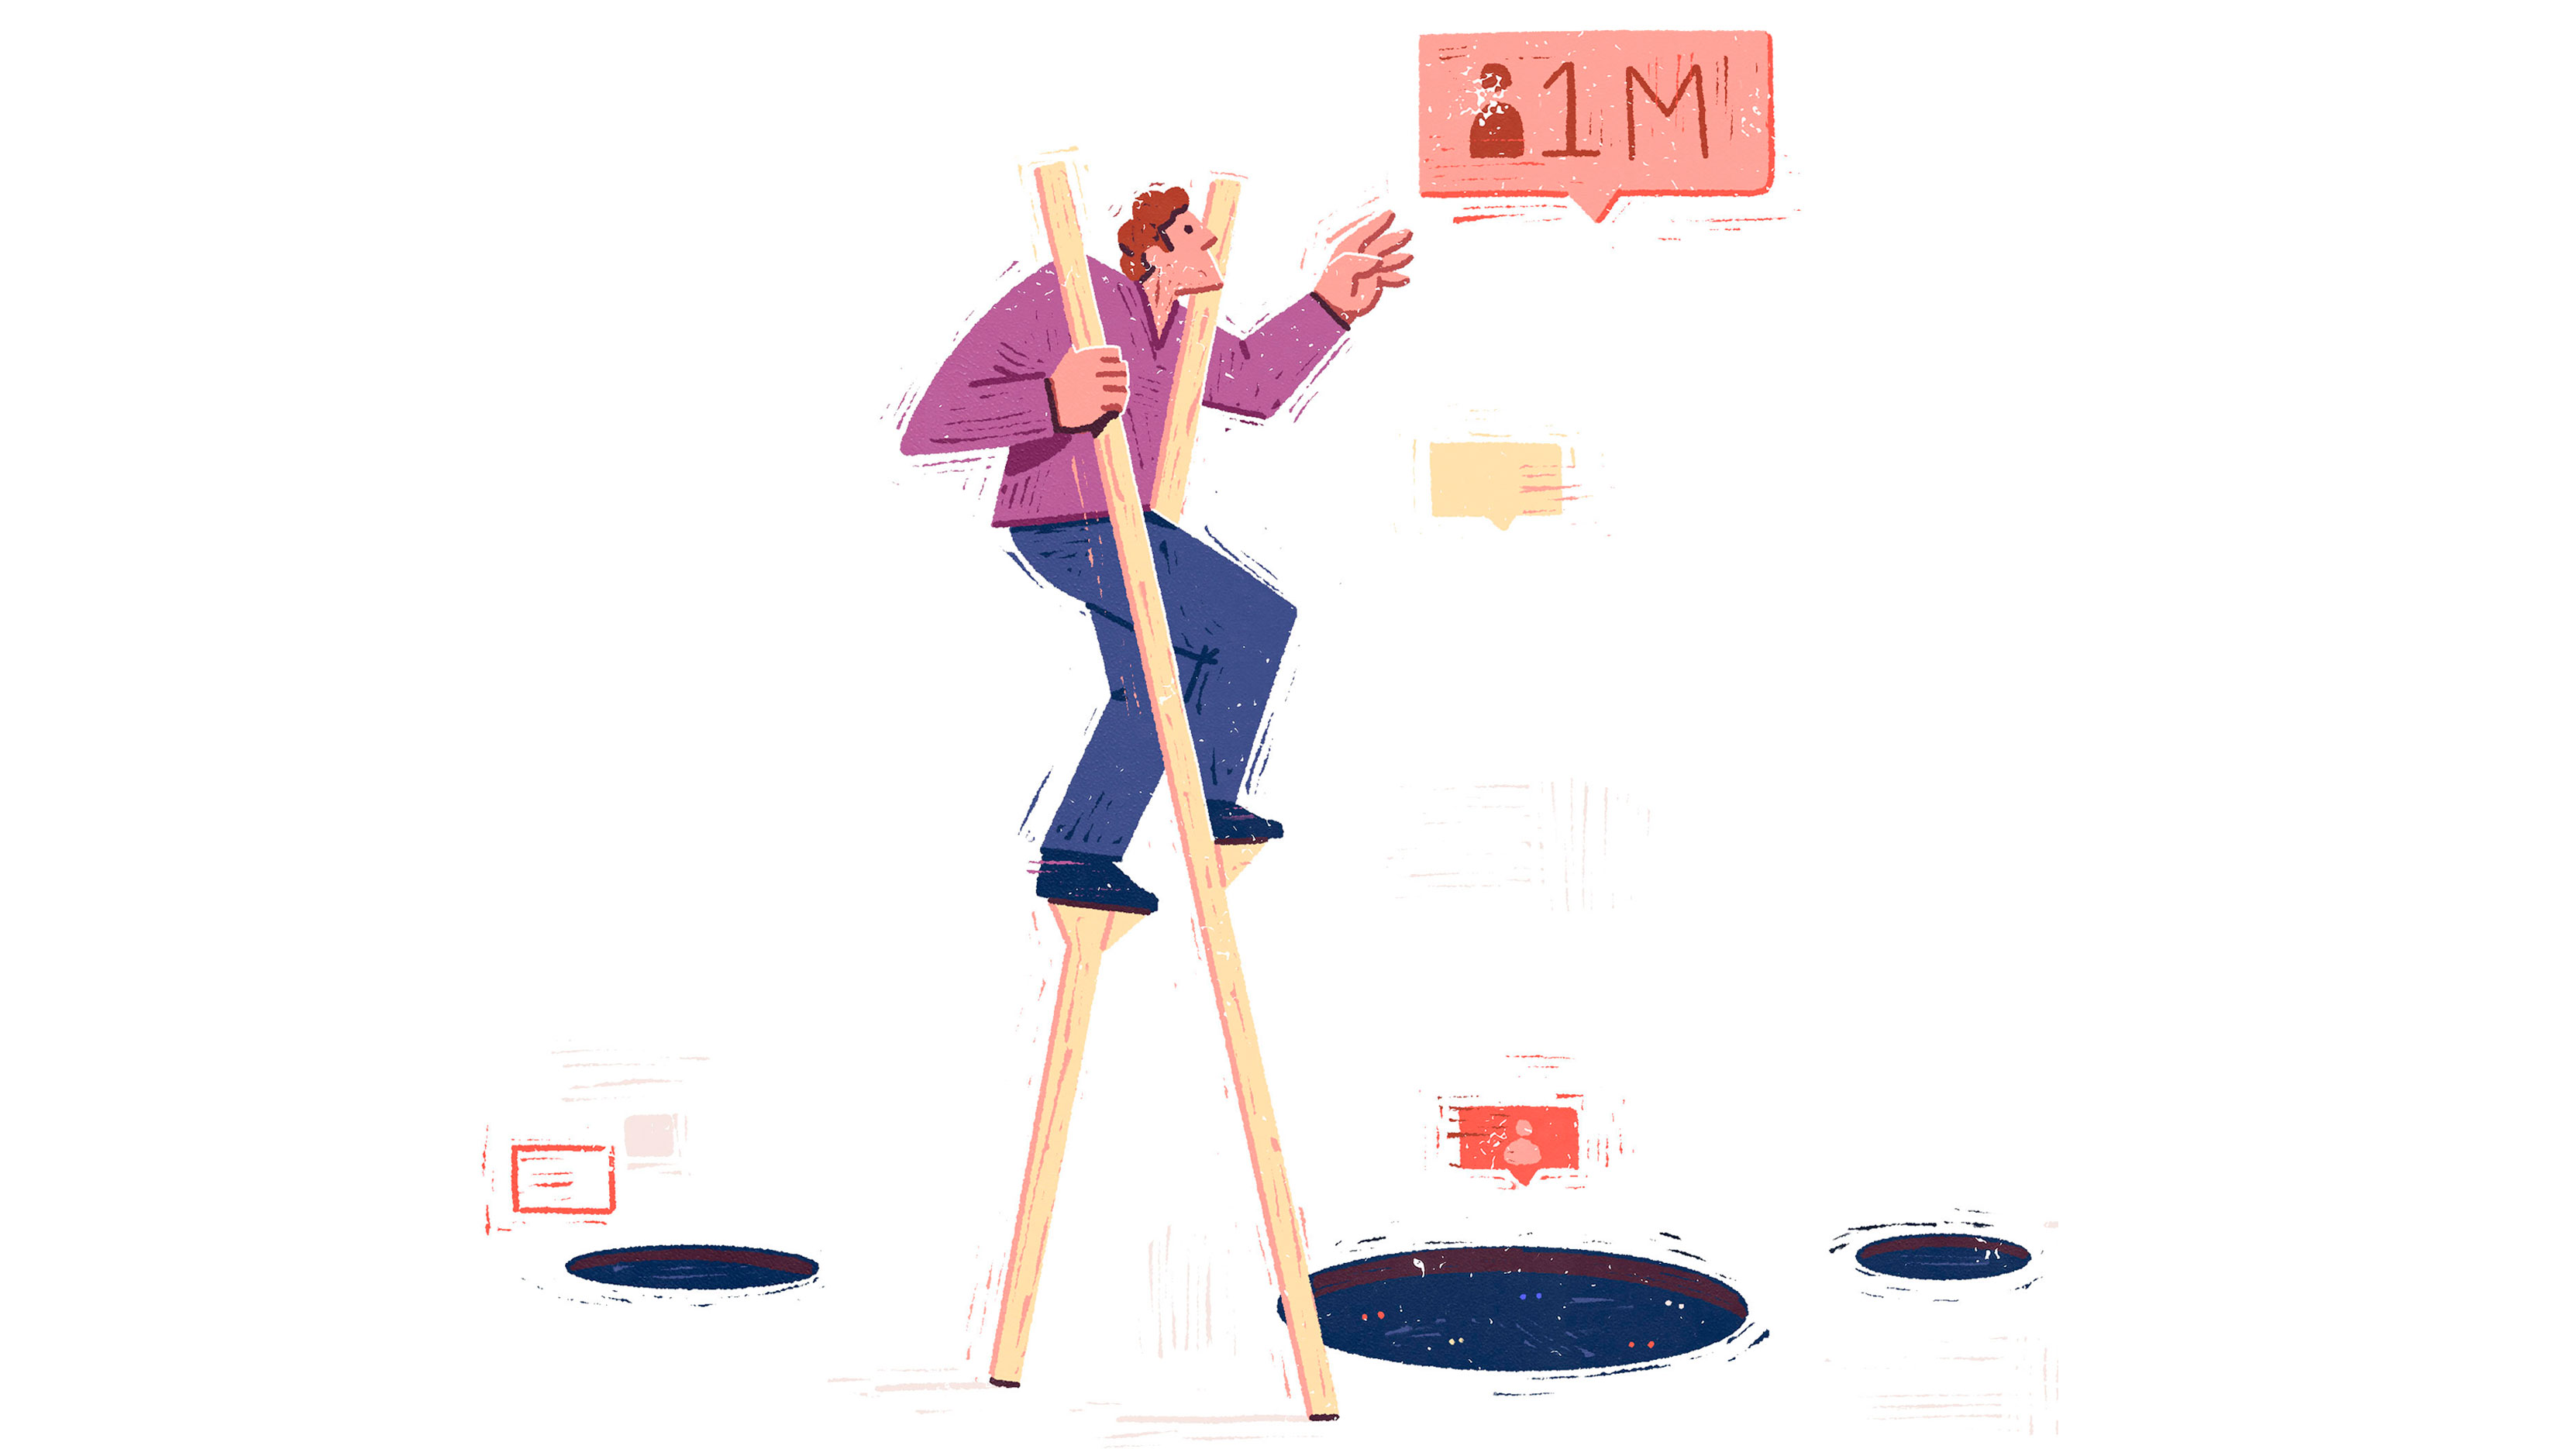 Illustration of a men on stilts, reaching for an icon of 1 million followers, about to fall into a hole